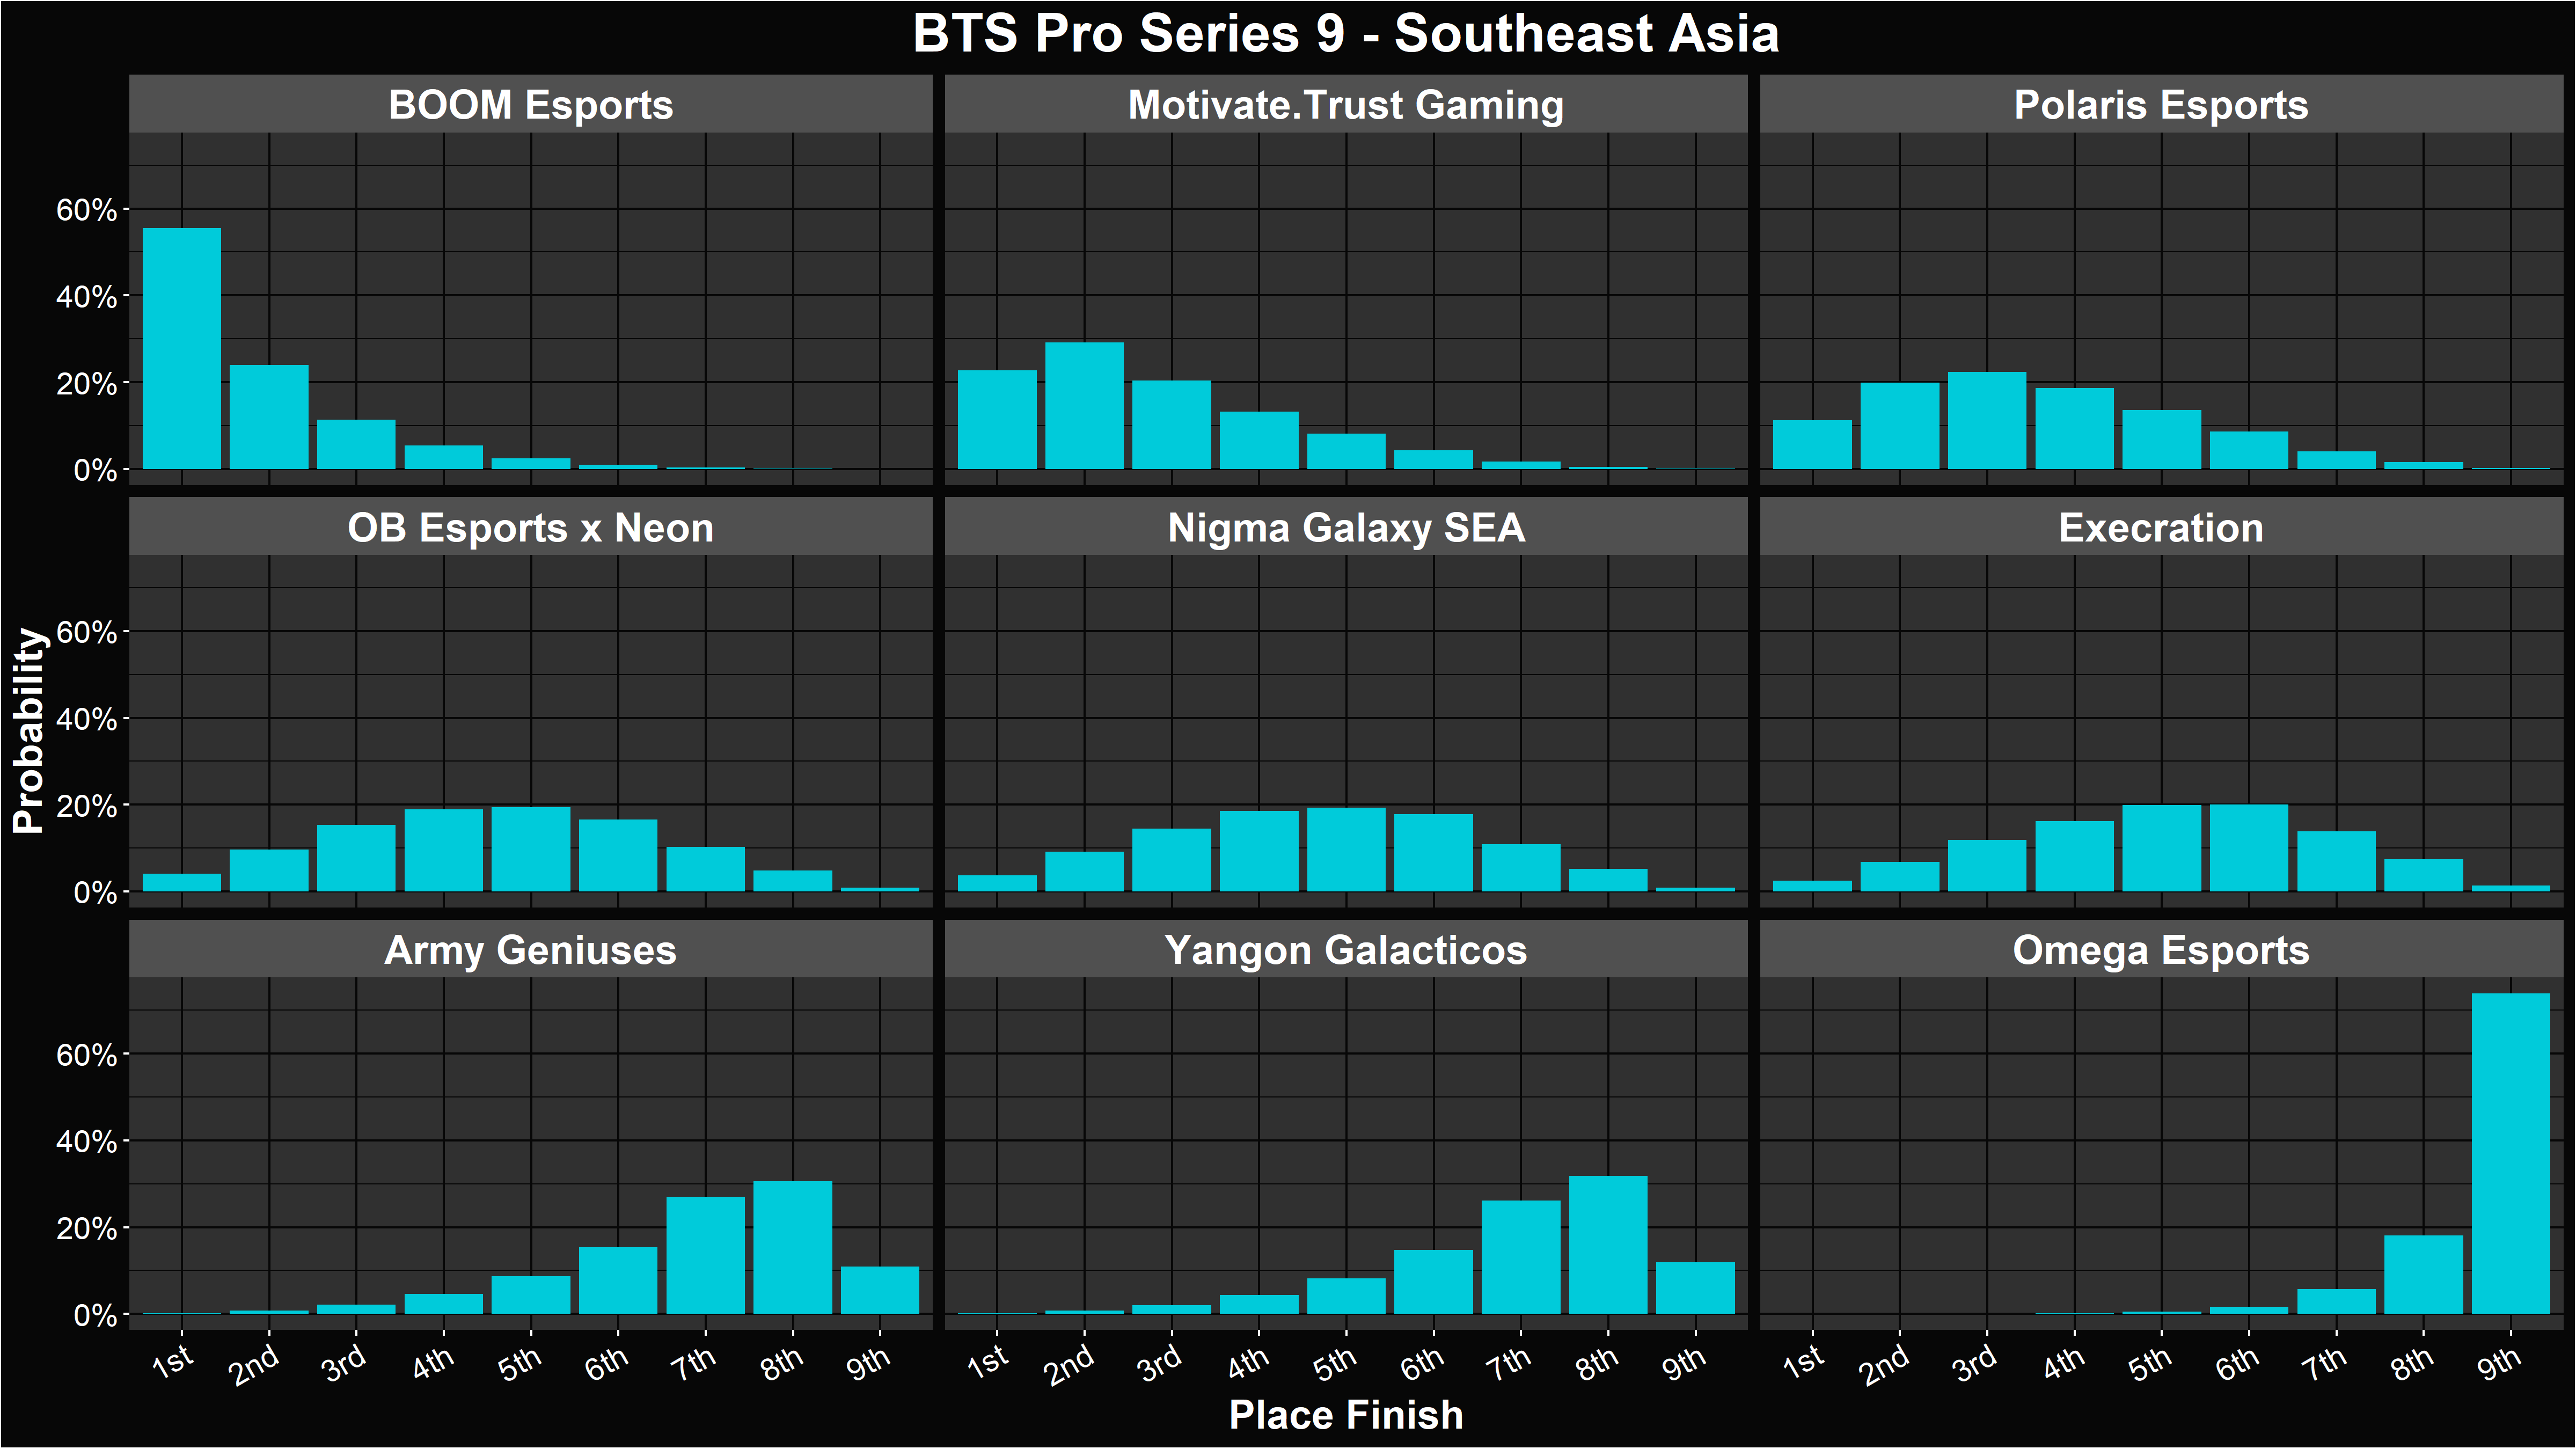 Alacrity's BTS Pro Series 9 Southeast Asia Group Stage Placement Distributions